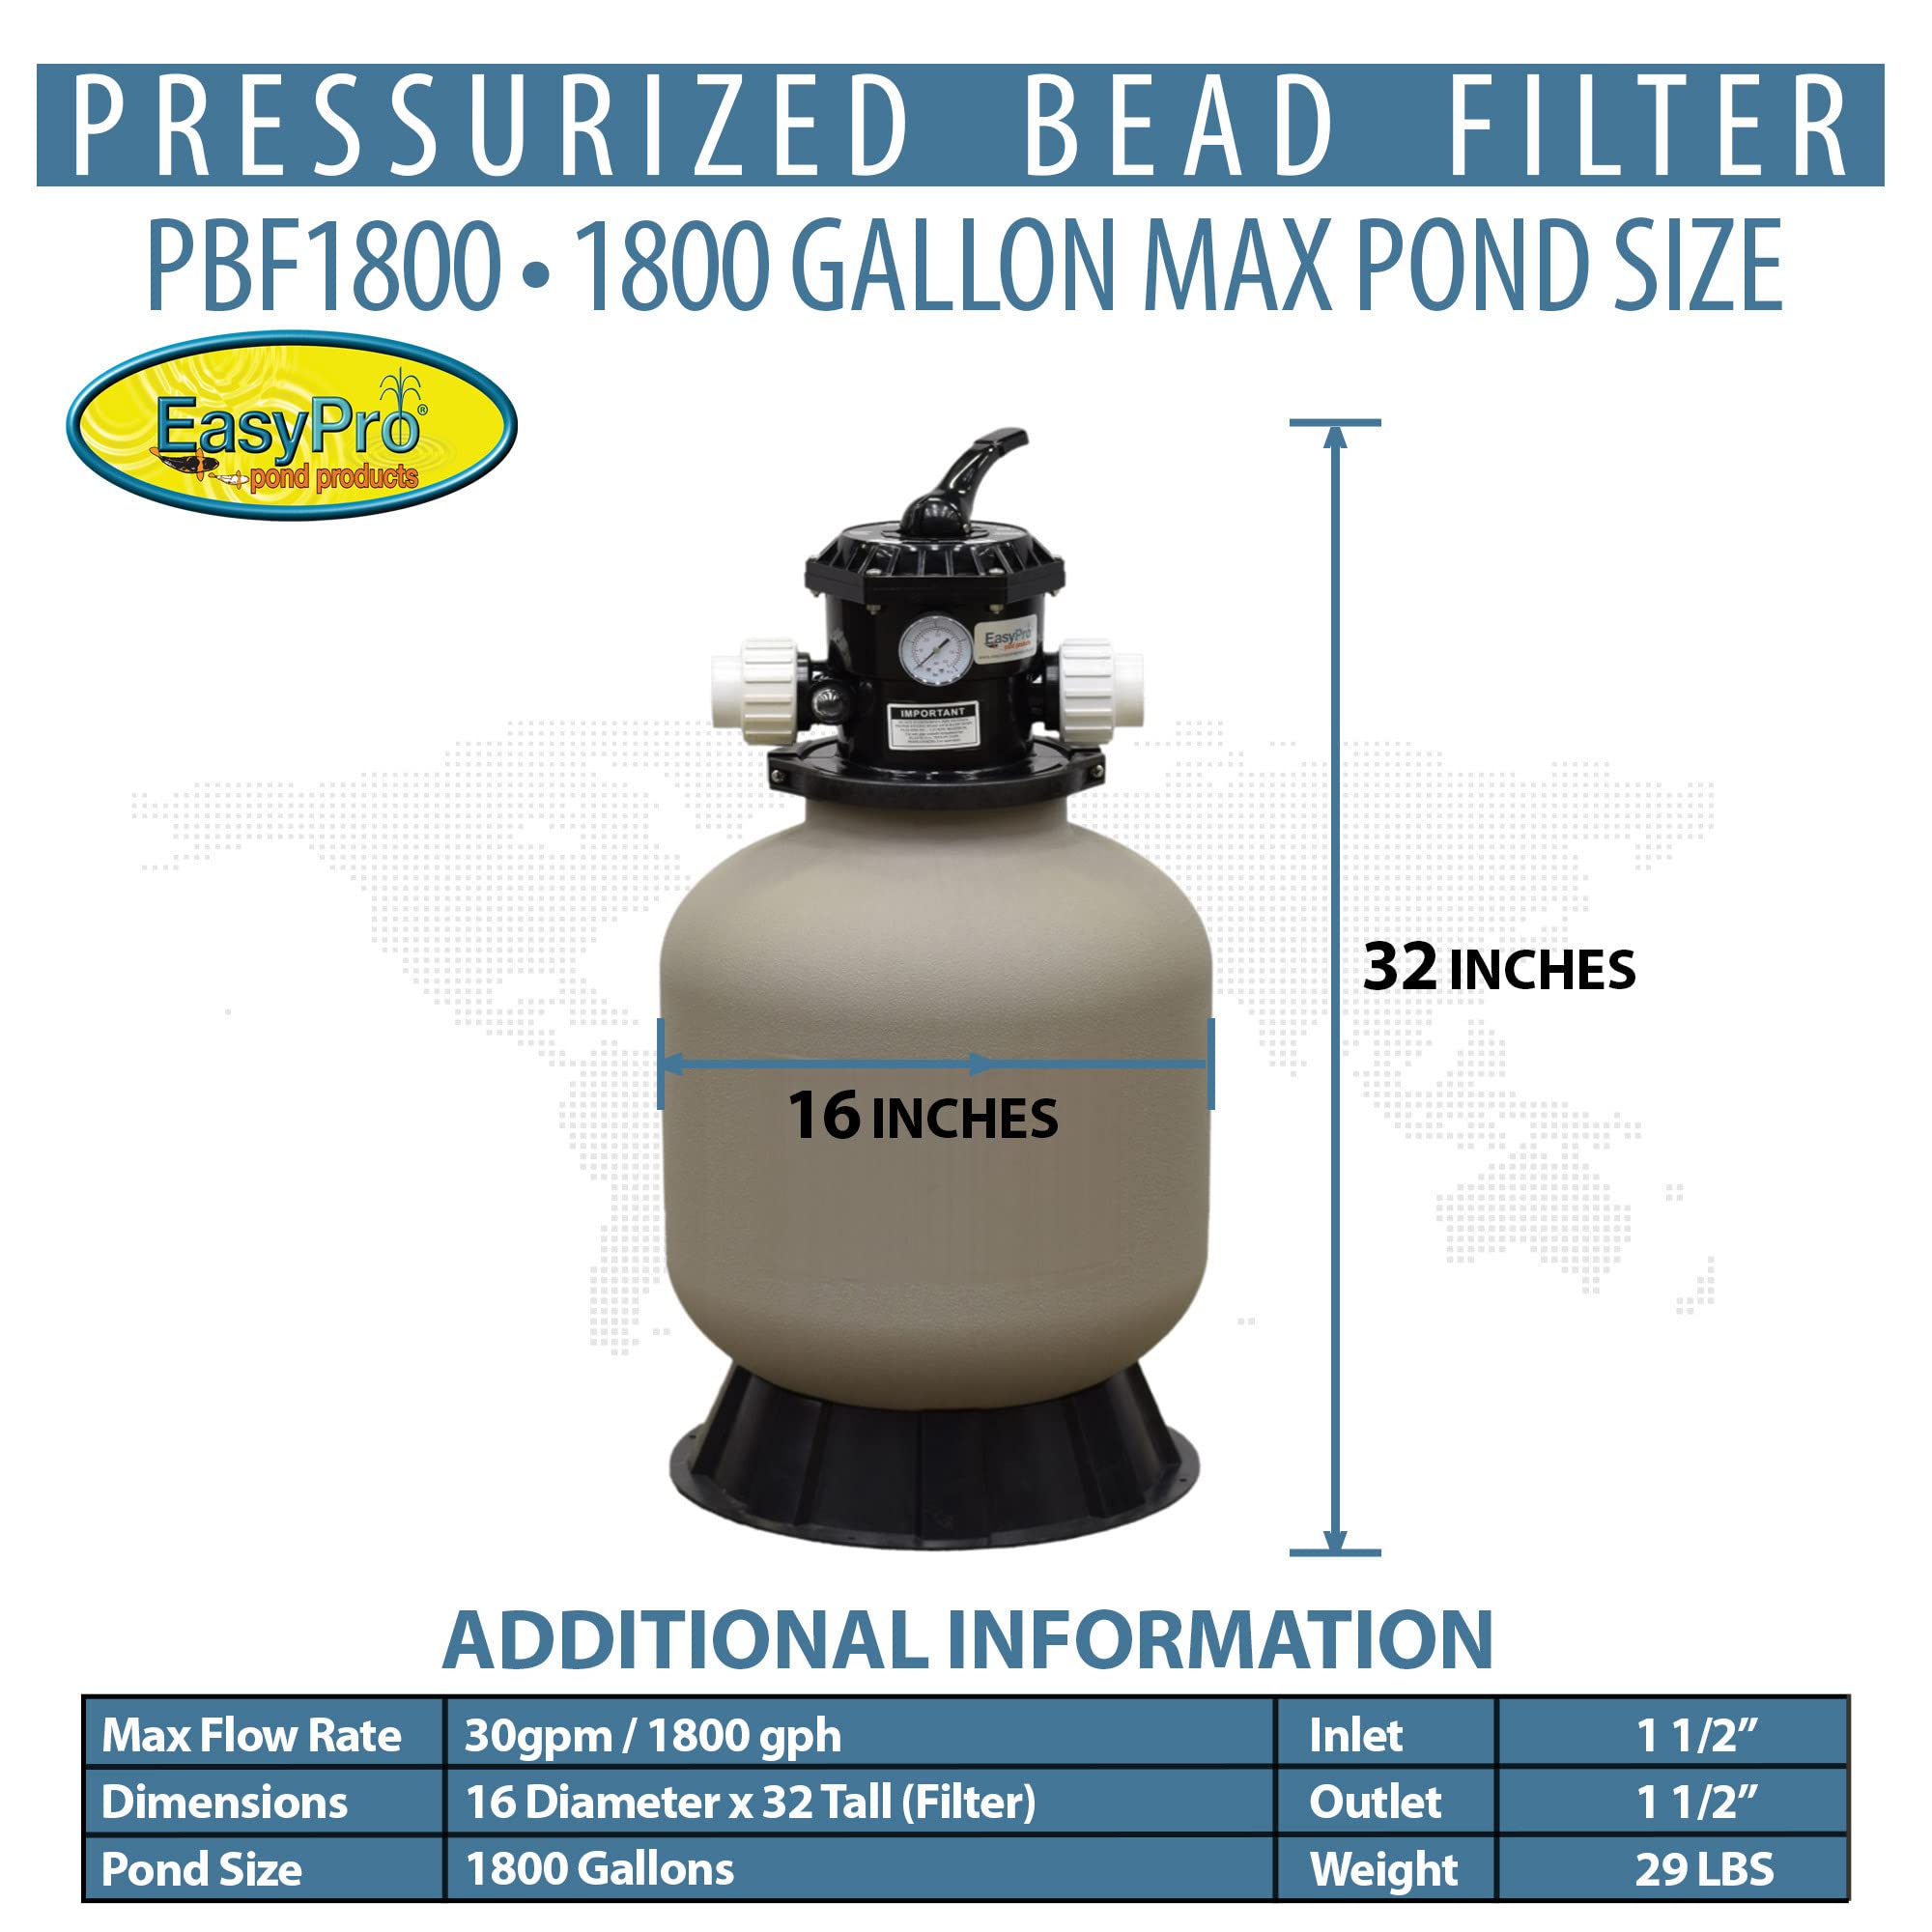 EasyPro PBF1800 Pressurized Bead Filter for Ponds & Fish Systems / 1800 Gallon Max. / Biological & Mechanical Media Provides Excellent Filtration/Easy Intallation & Cleaning